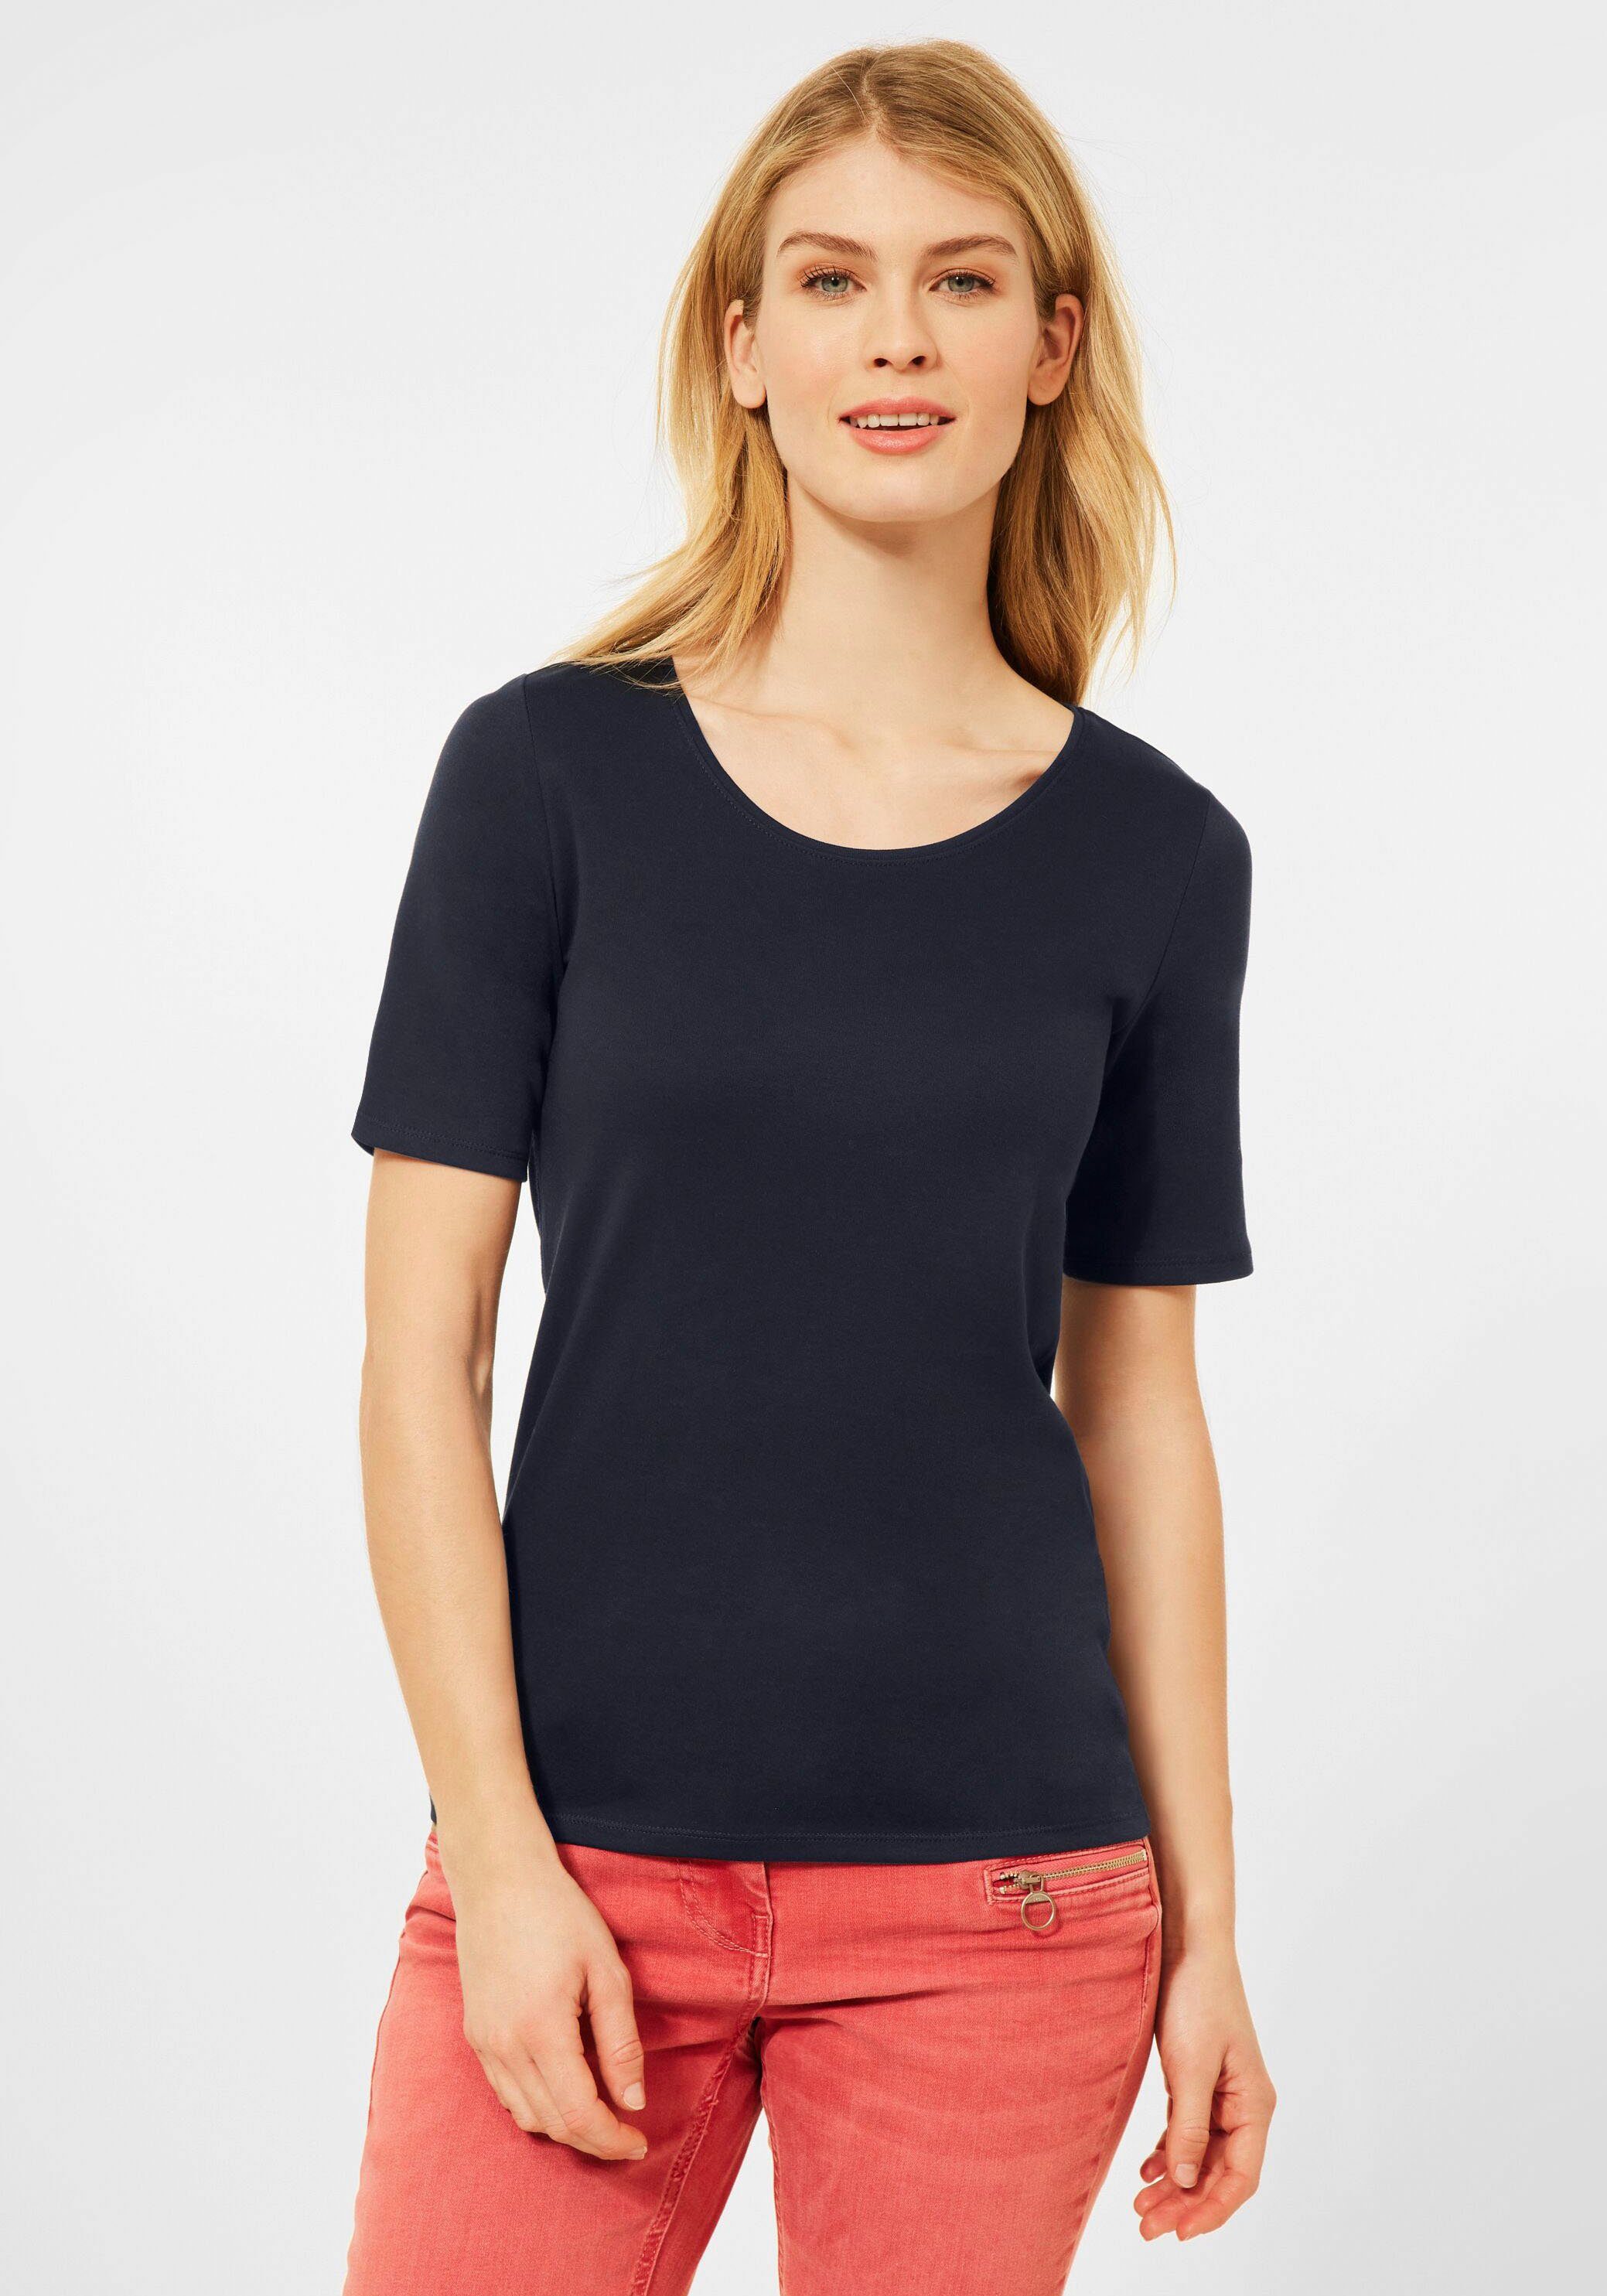 Cecil T-Shirt Style deep blue Unifarbe in Lena